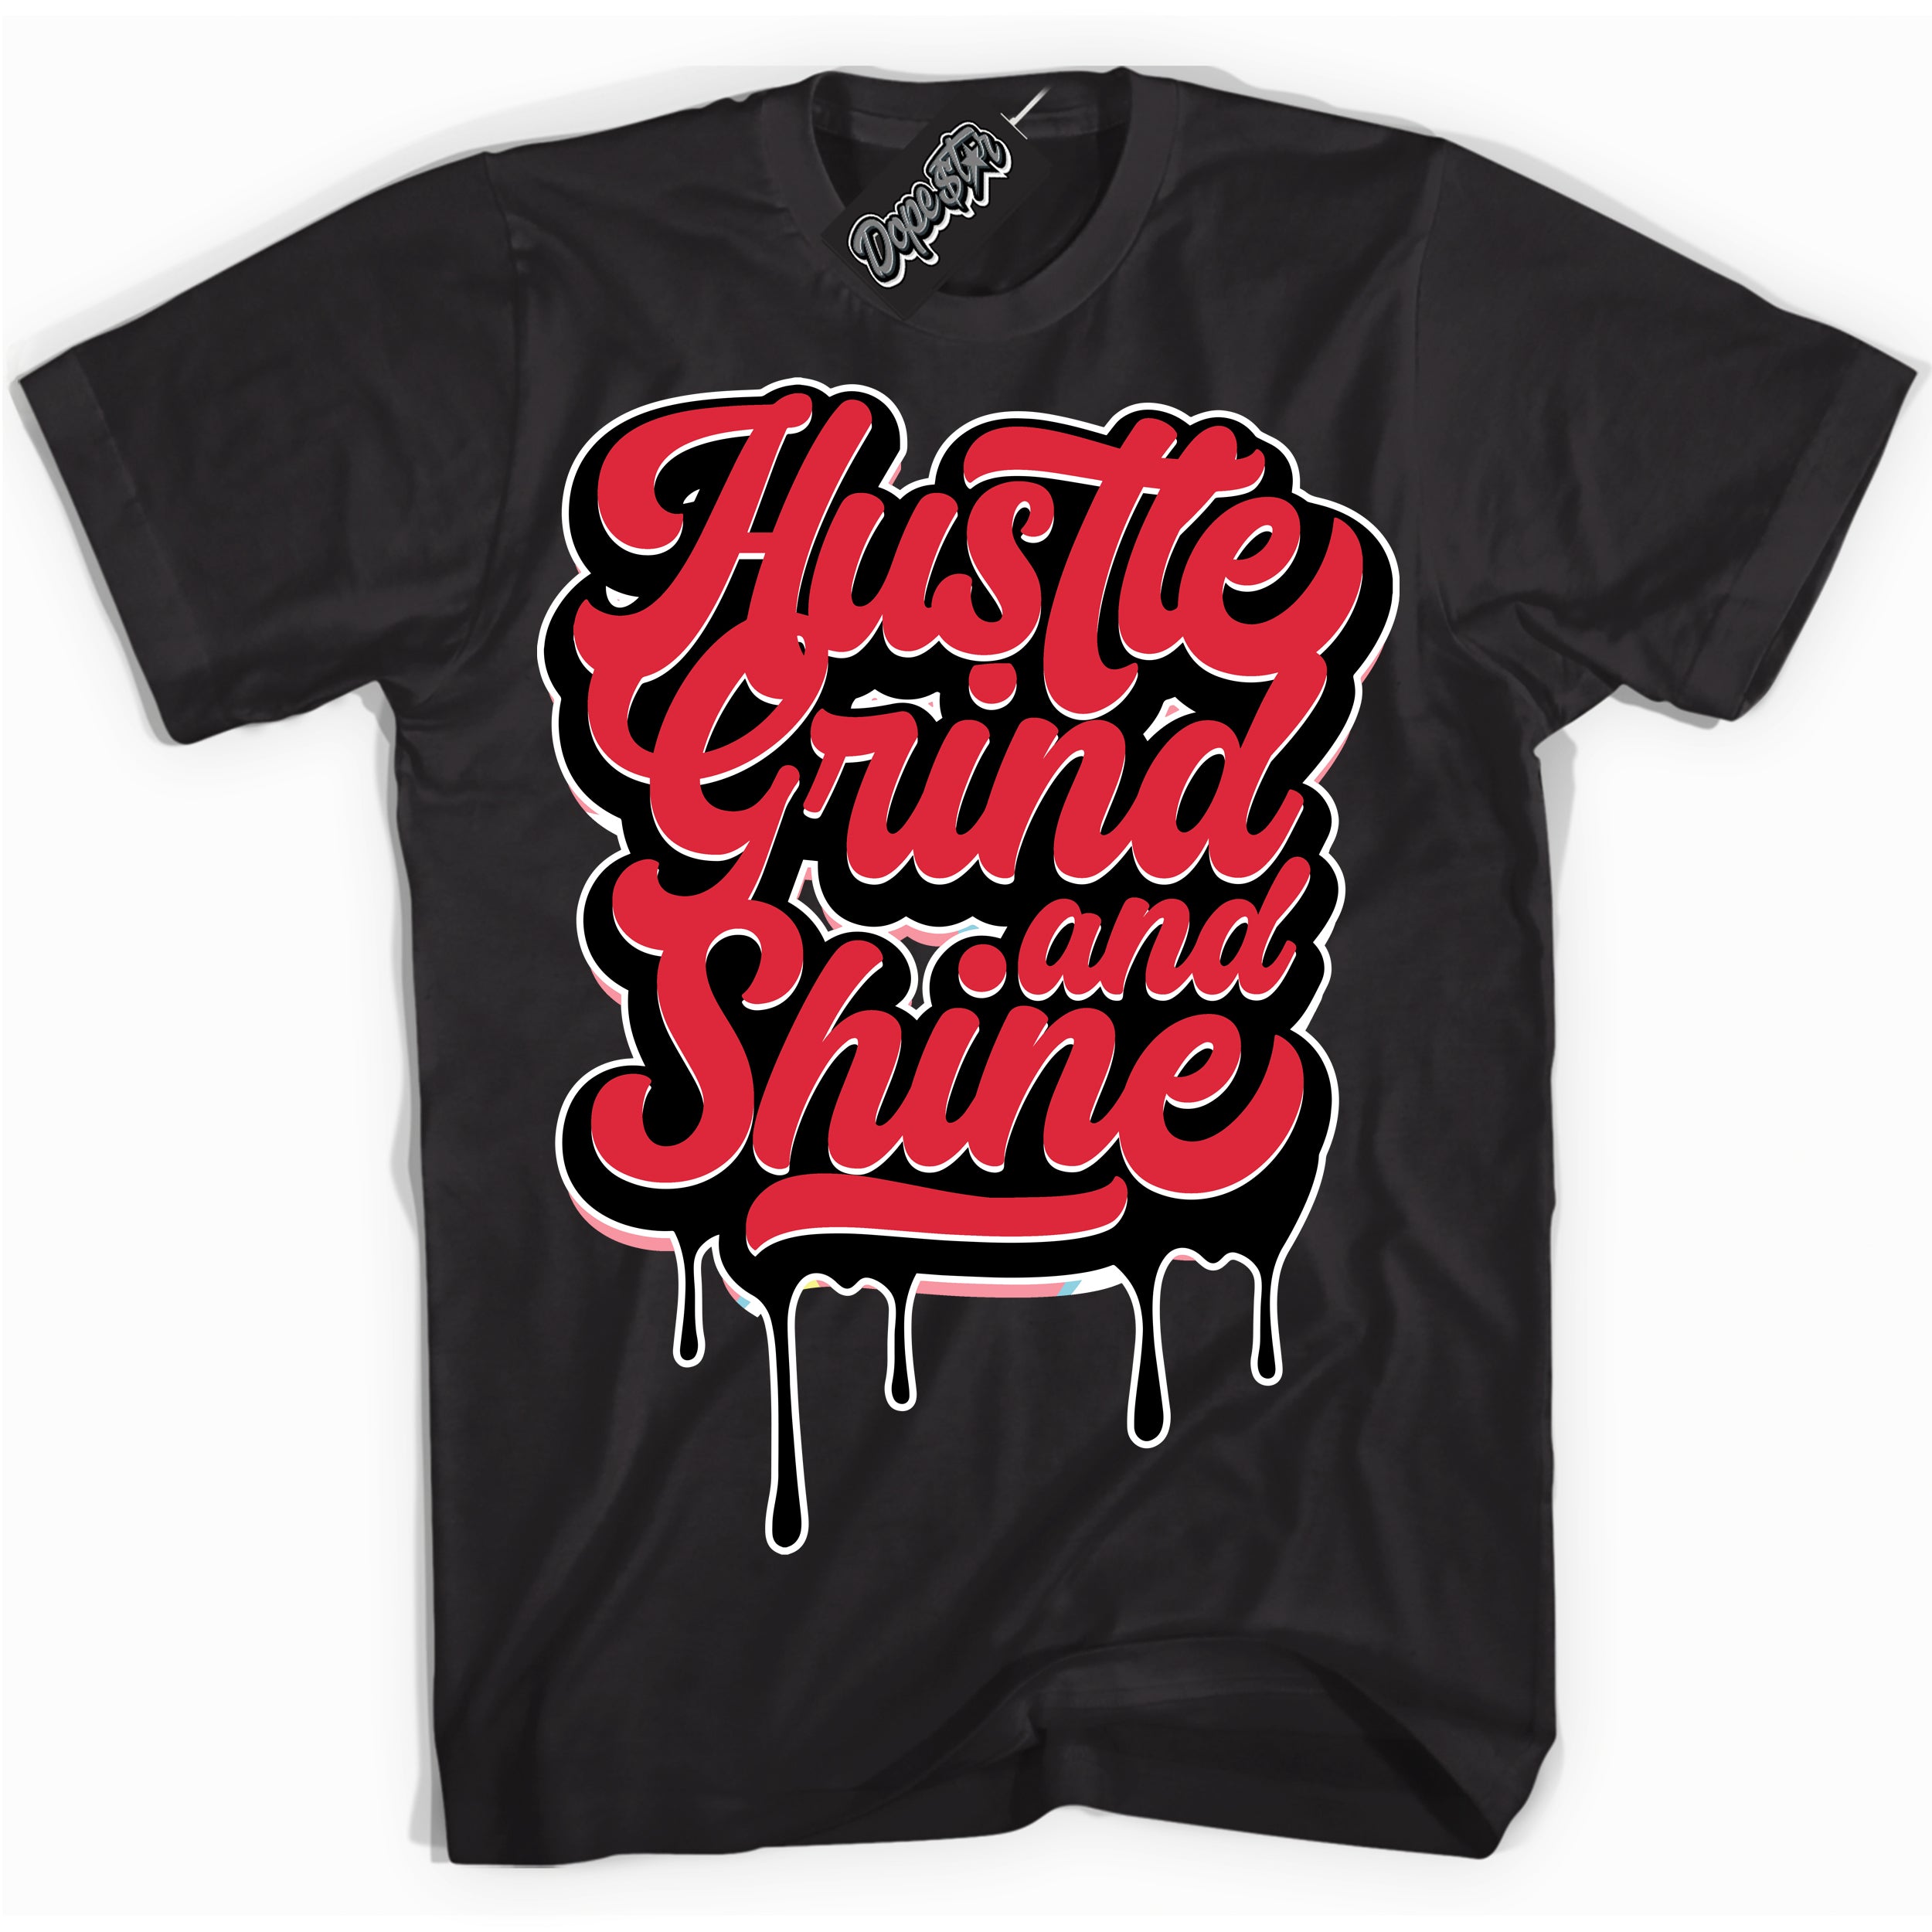 Cool Black graphic tee with “ Hustle Grind And Shine ” design, that perfectly matches Spider-Verse 1s sneakers 